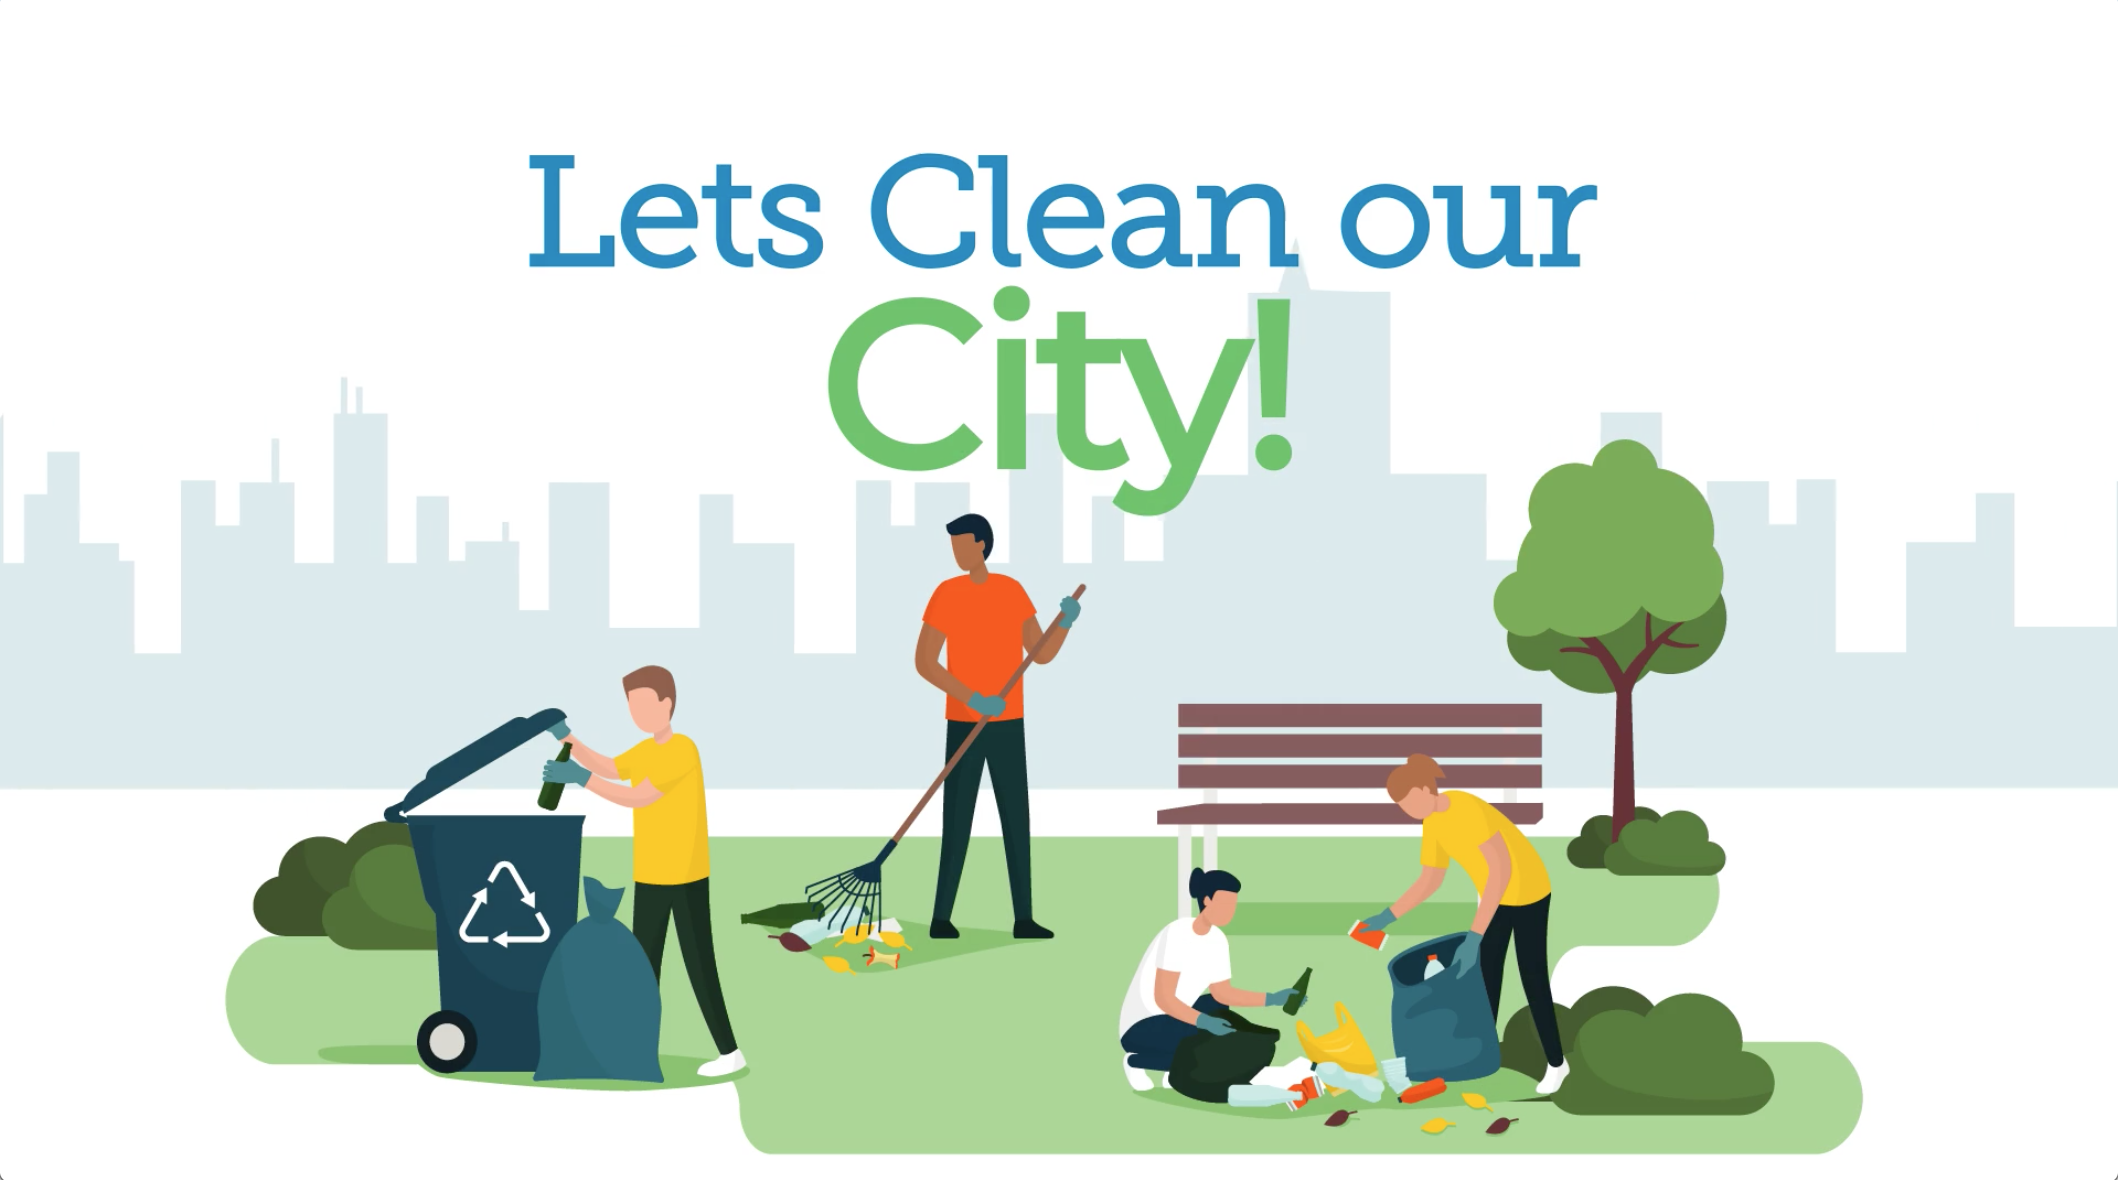 Clean our city image